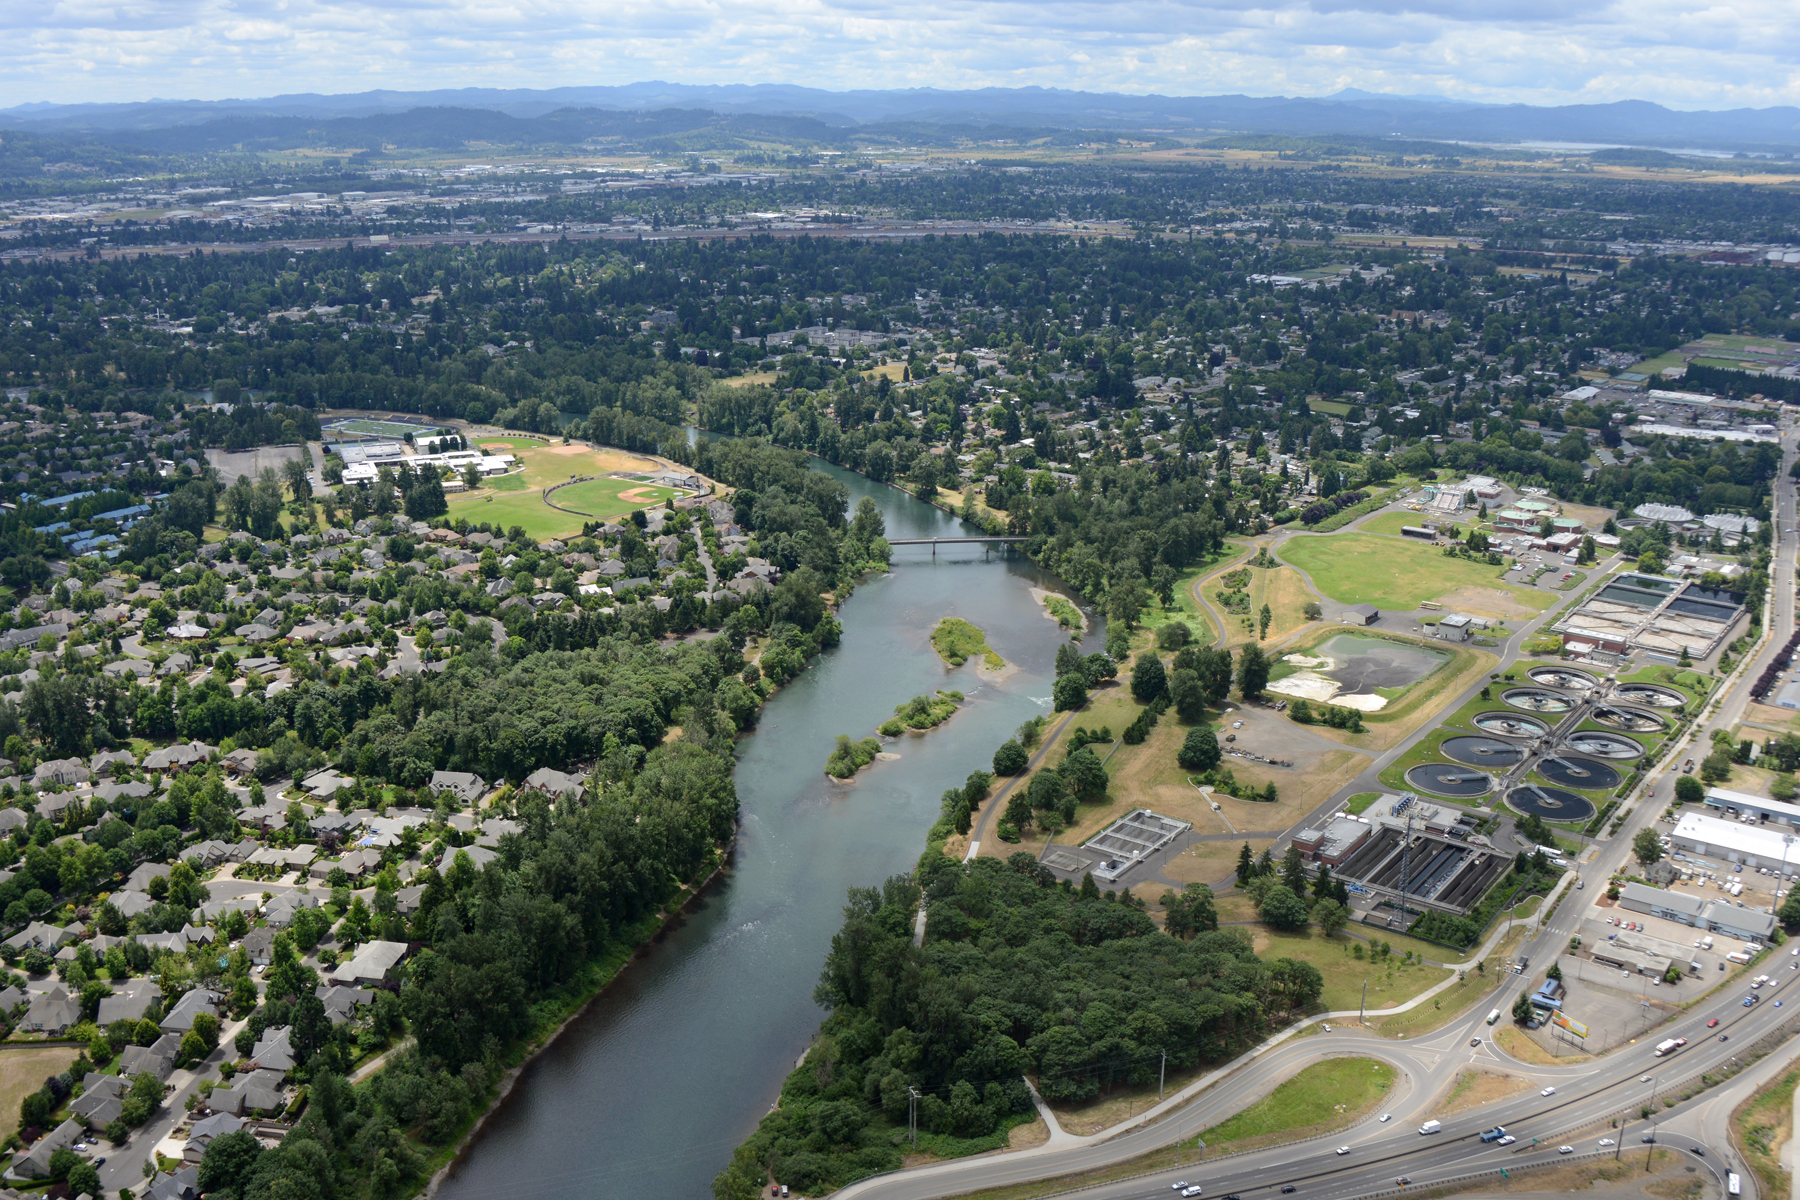 Aerial of Eugene, Springfield, and Willamette River